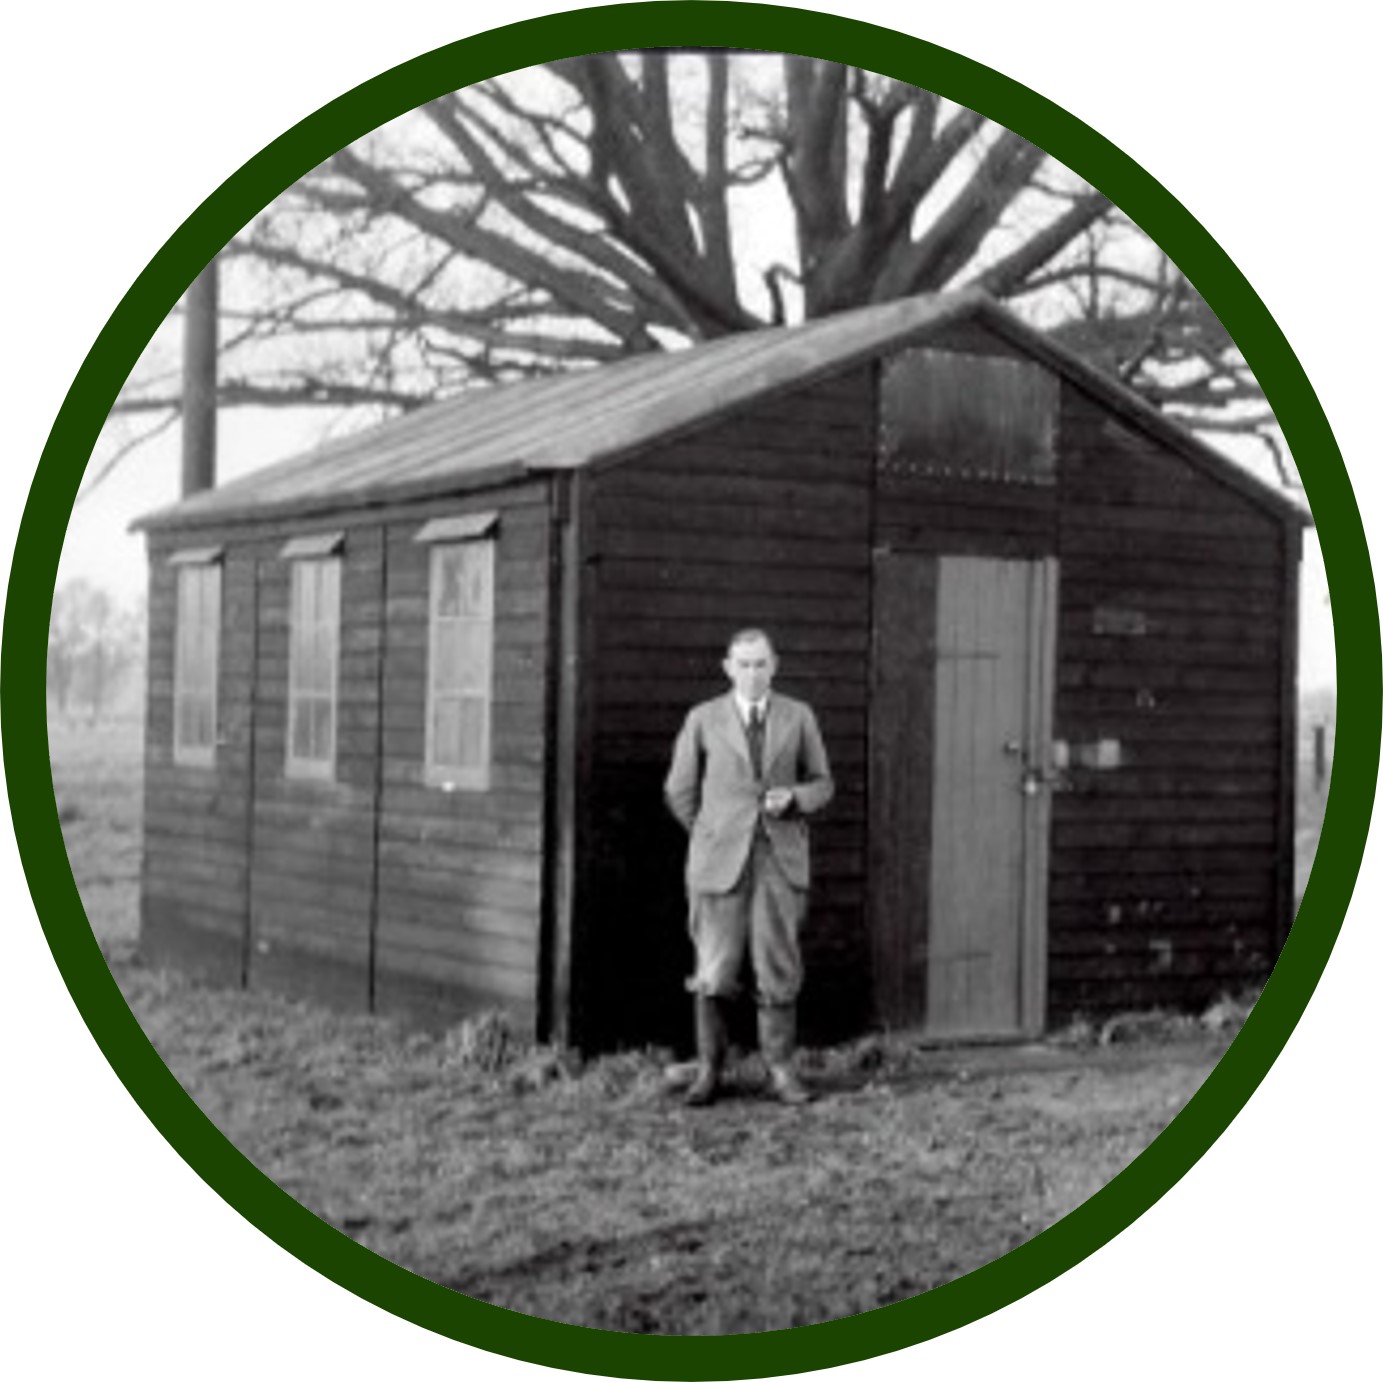 Man stood in front of a shed